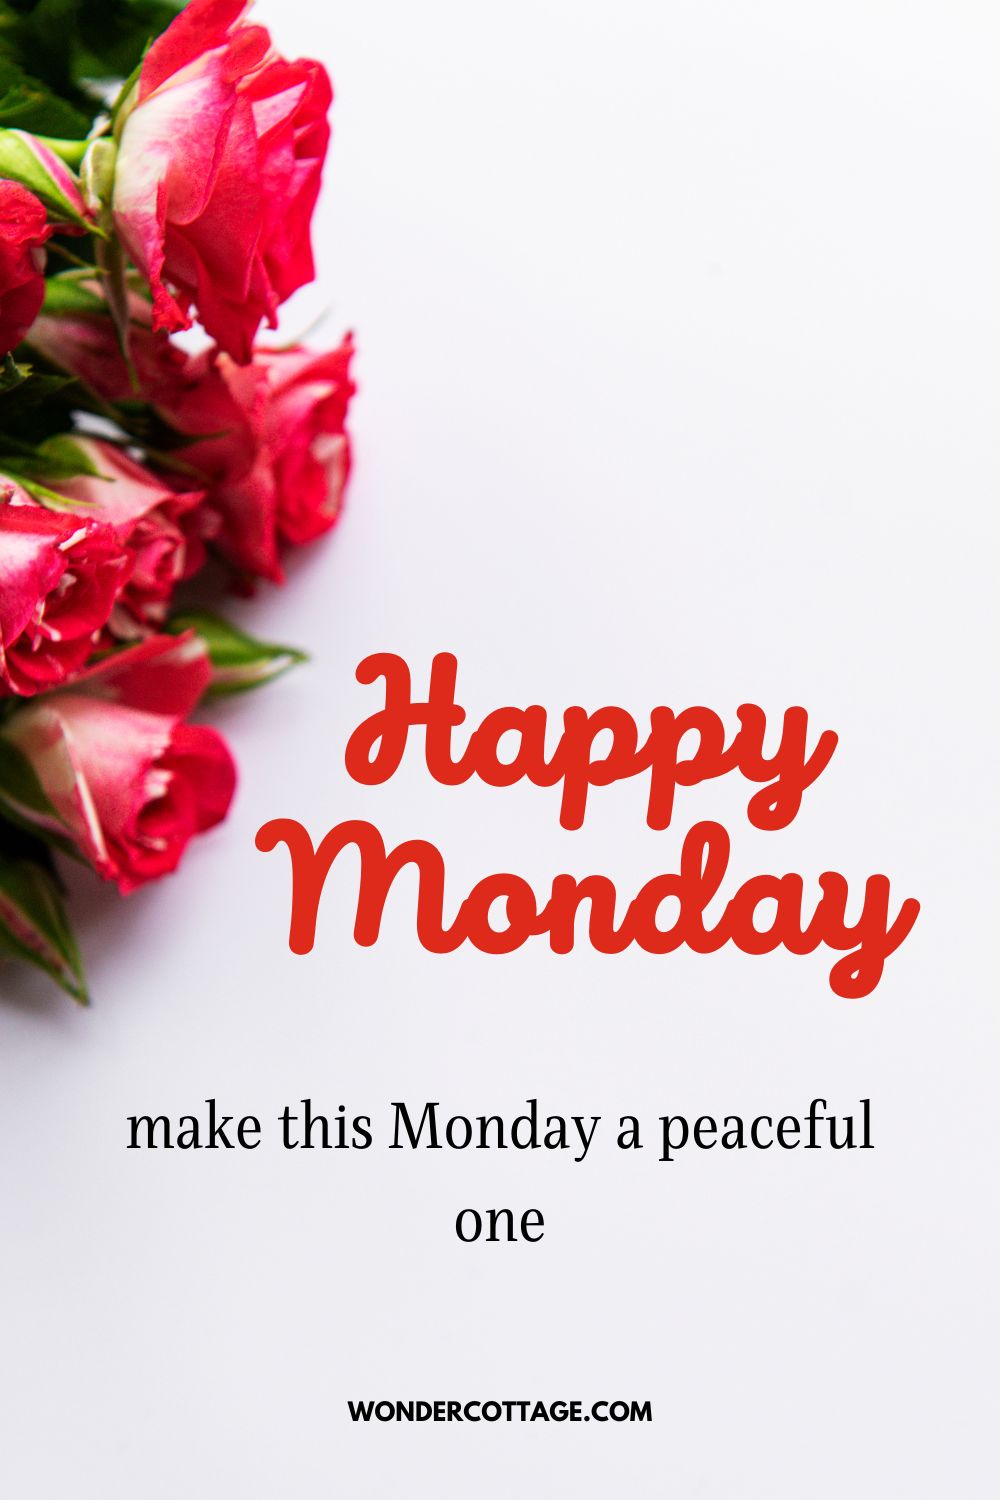 Happy Monday, make this Monday a peaceful one